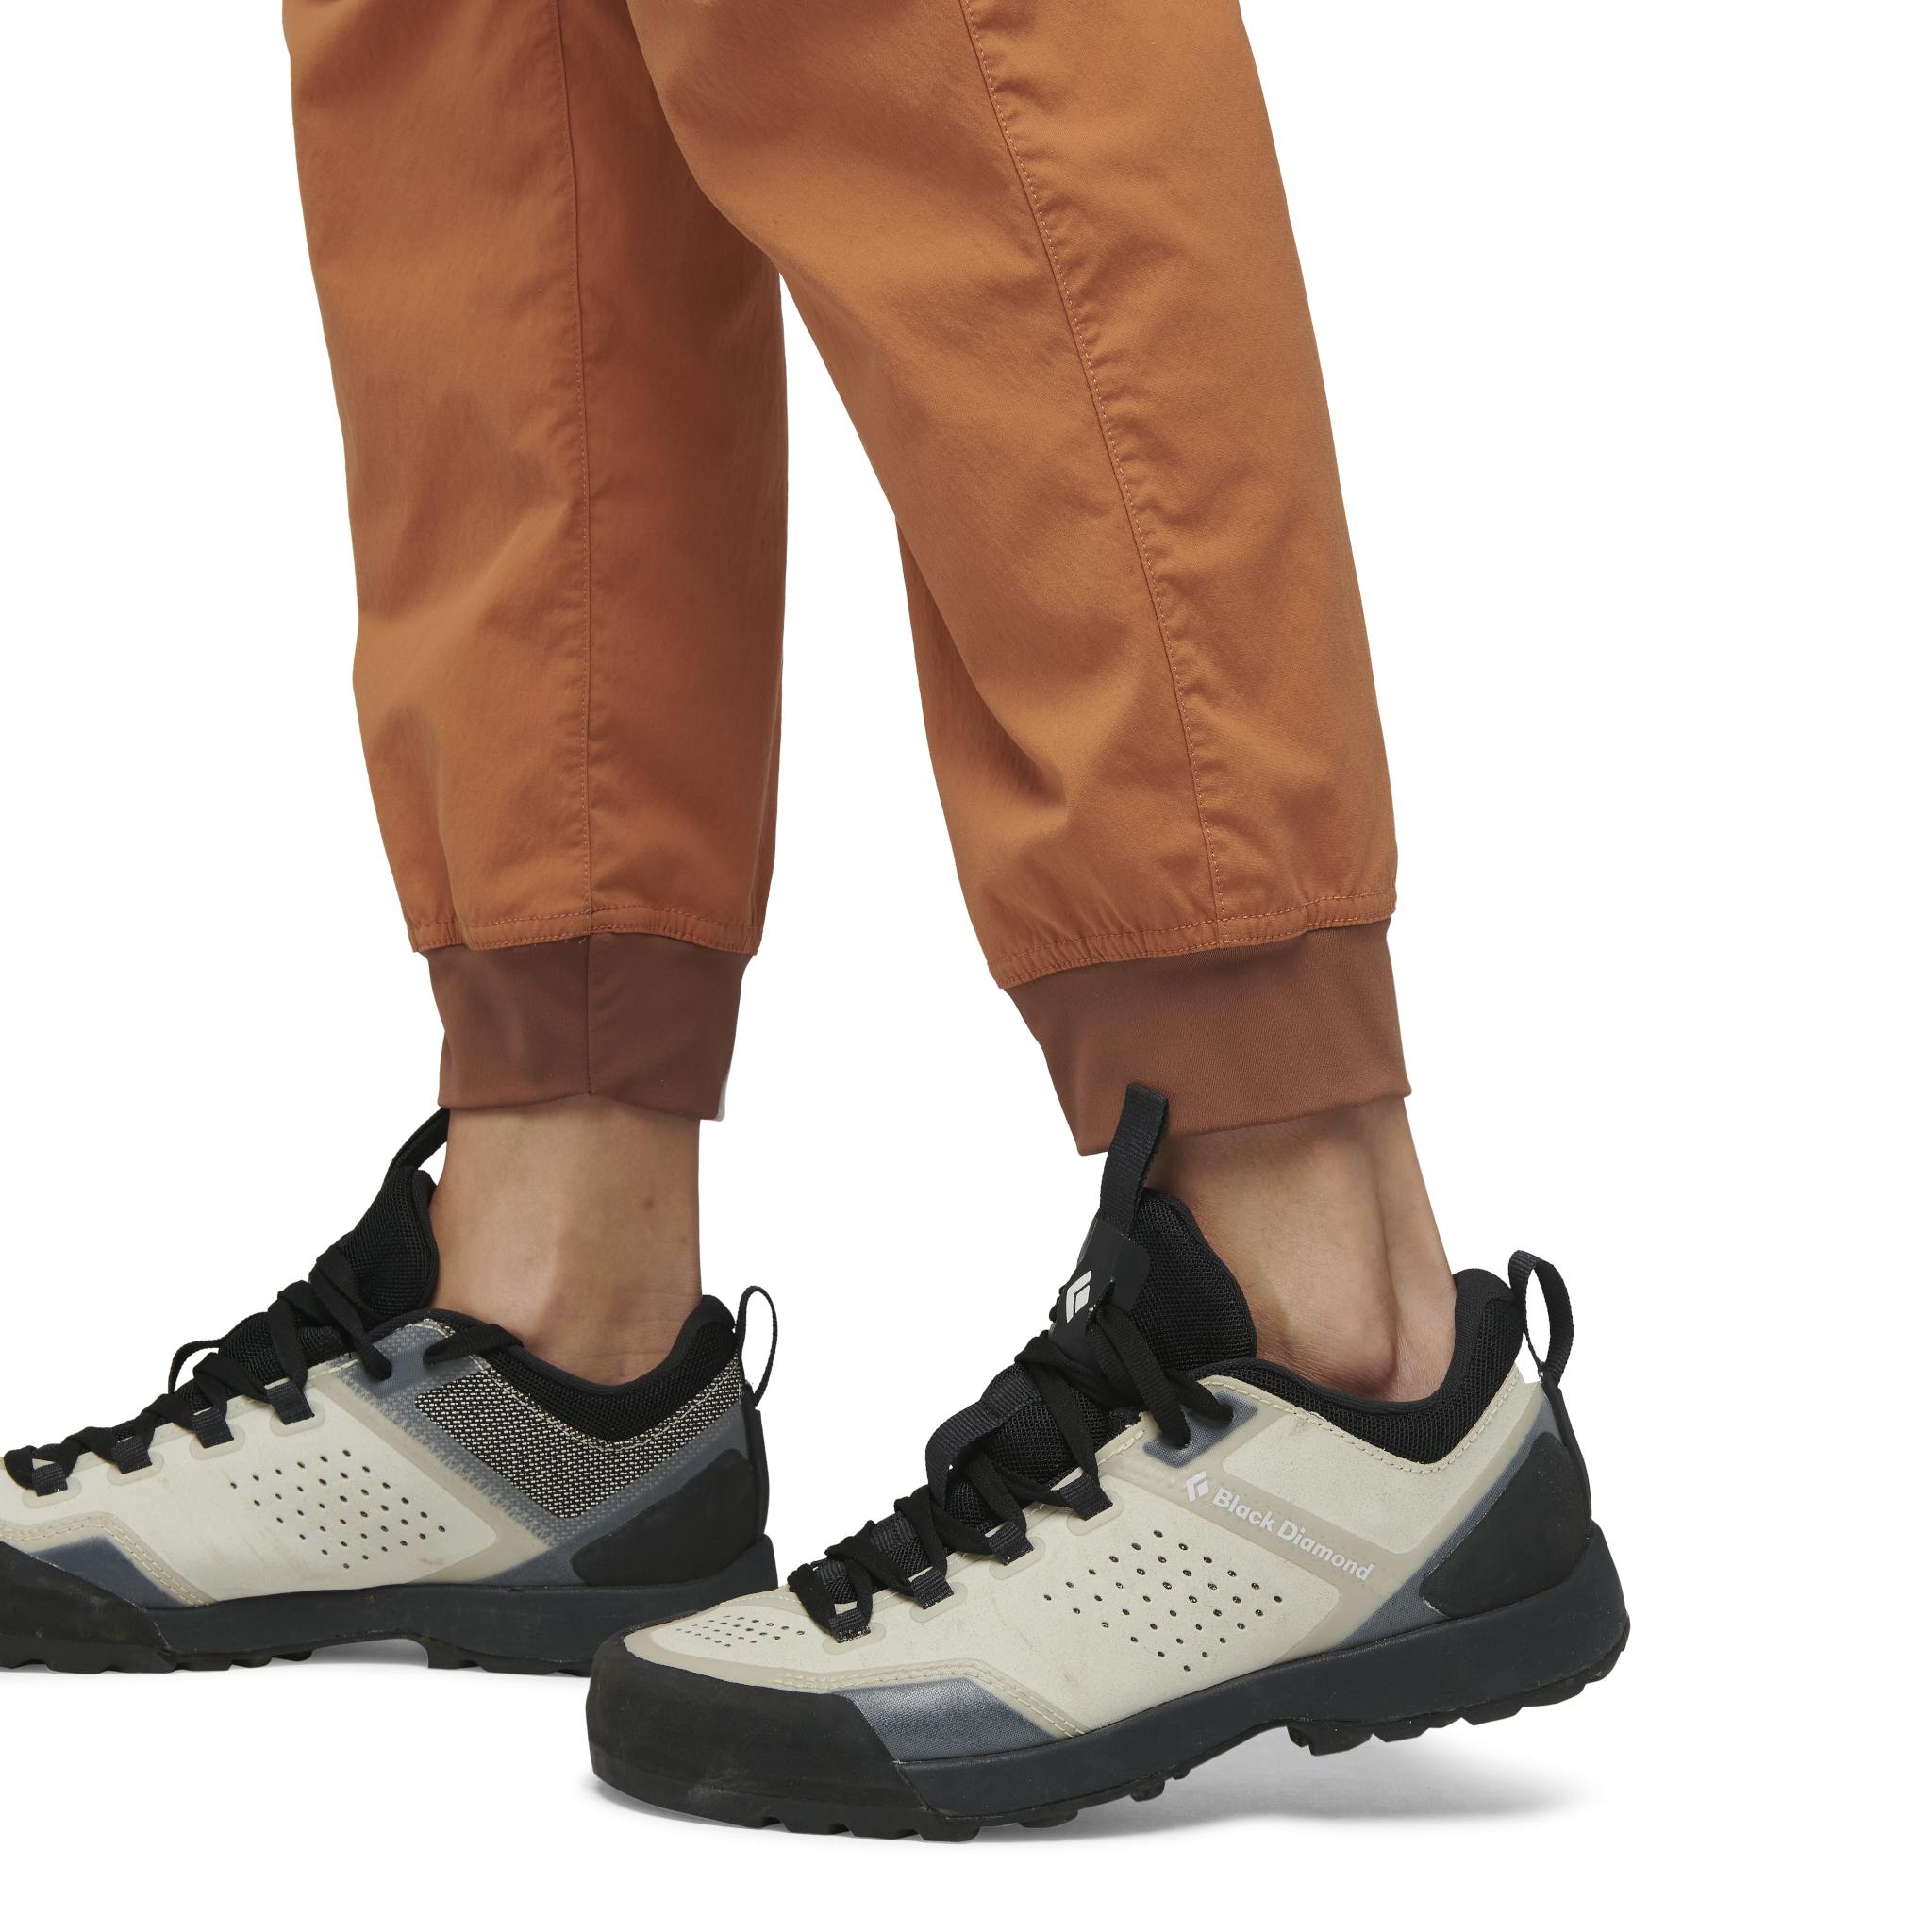 A studio image of the Technician Jogger highlighting the elastic ankle cuff.